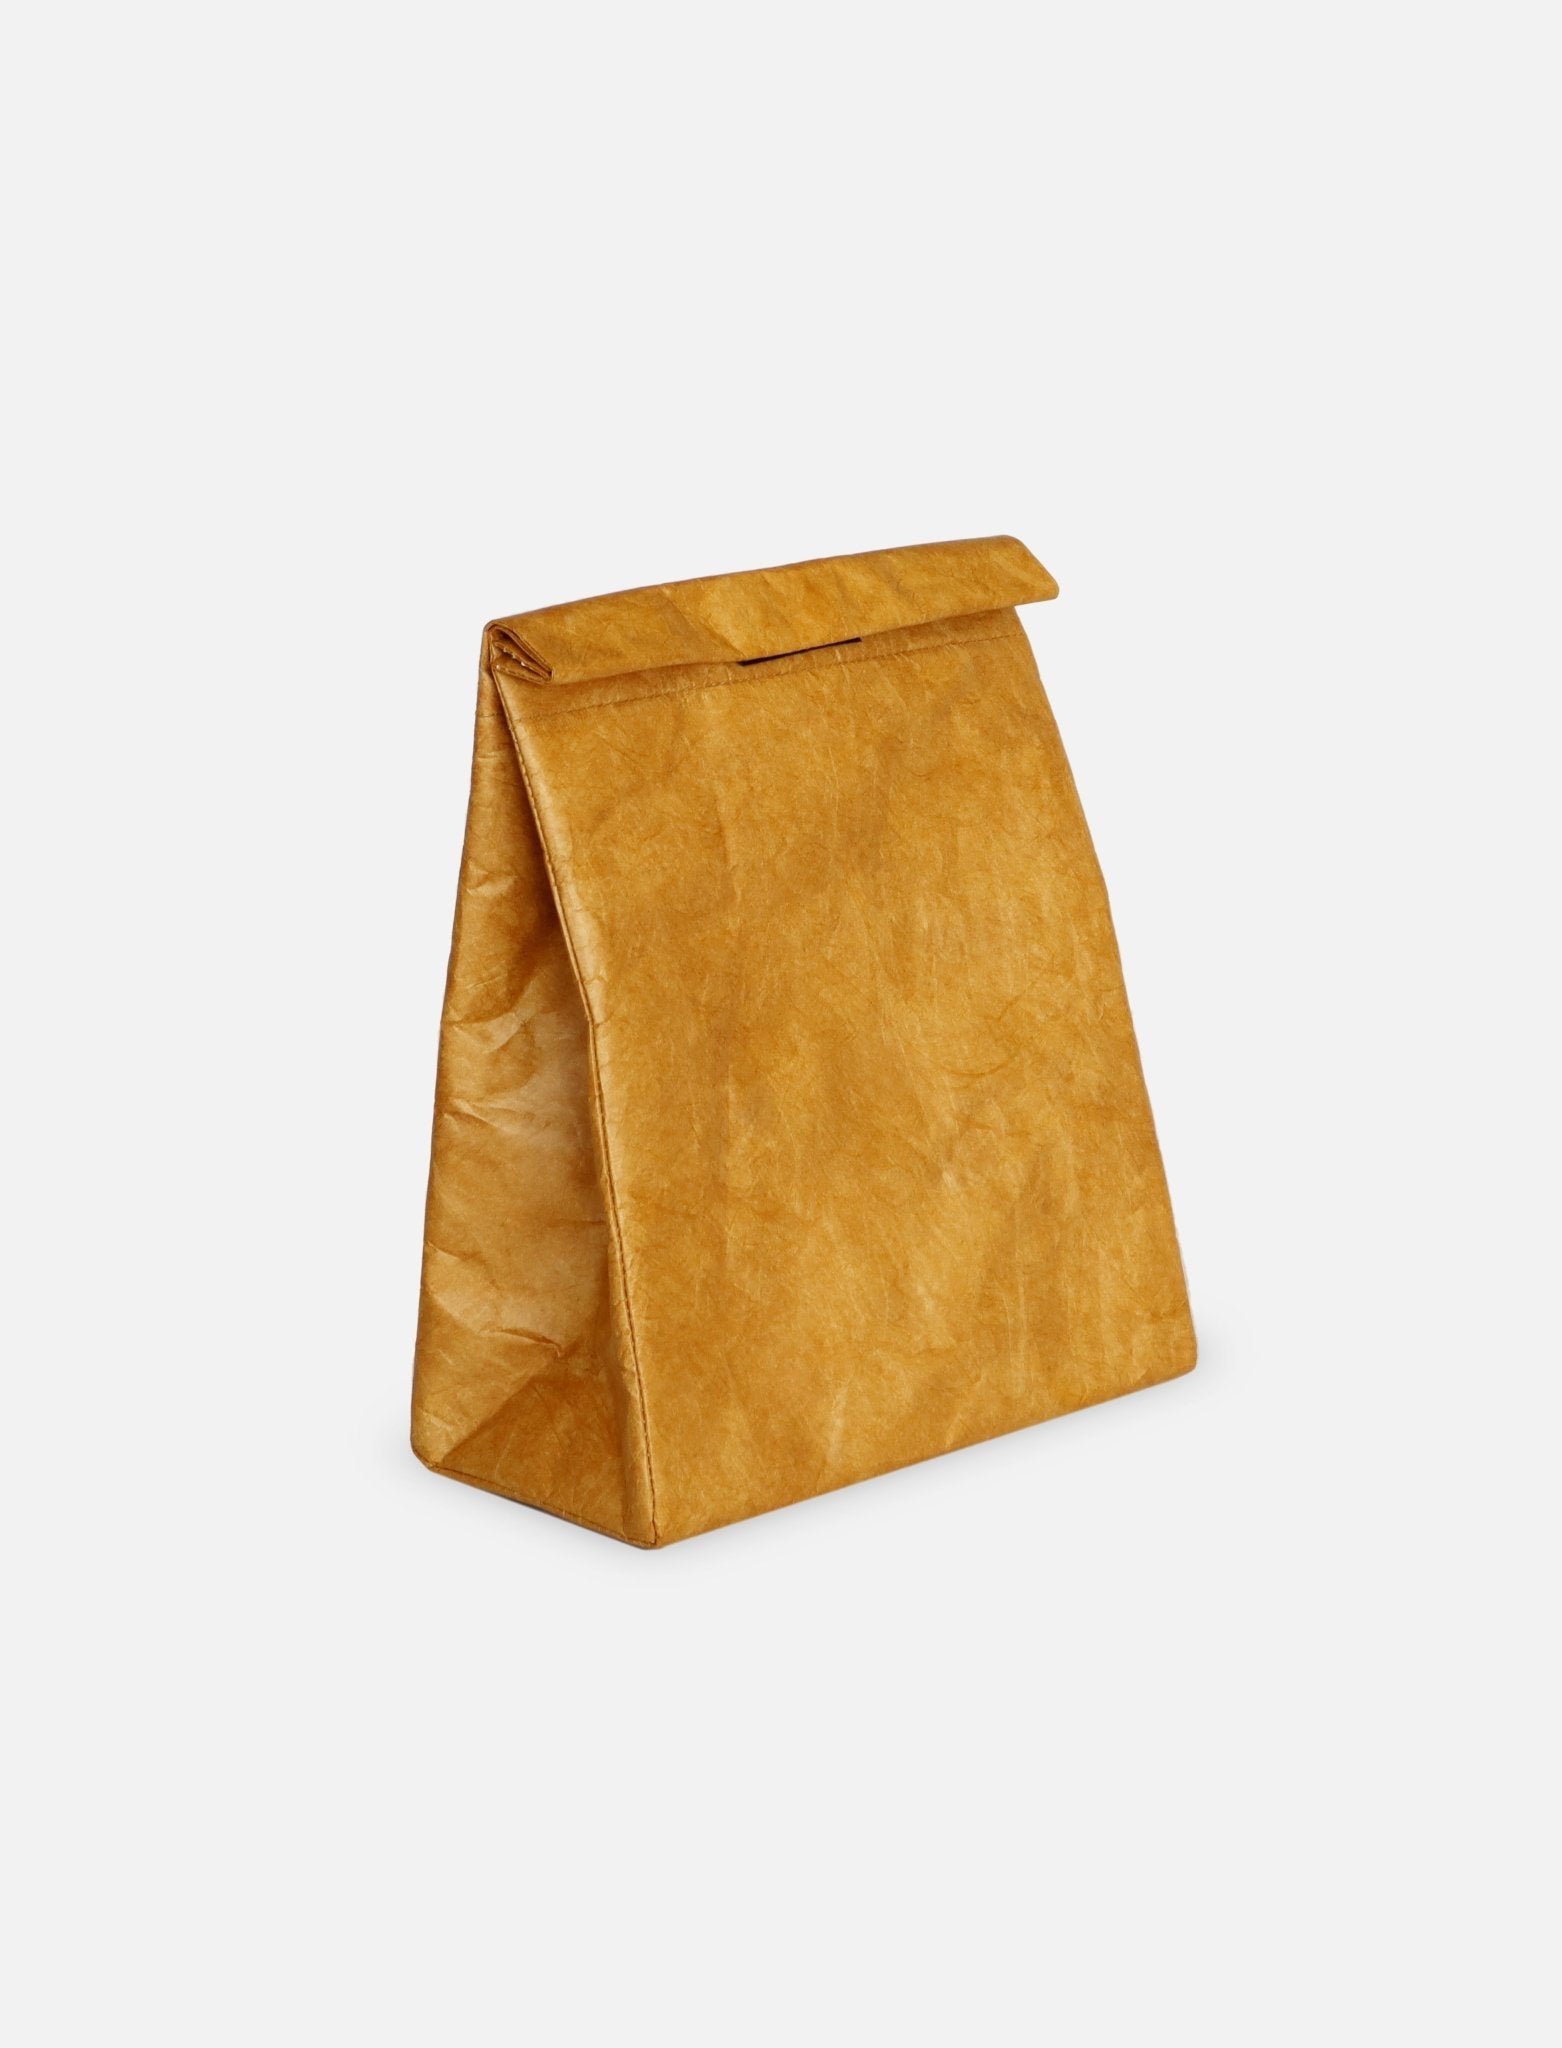 12L No Handles Promo Bag (28 x 28 x 36cm) - thermabags